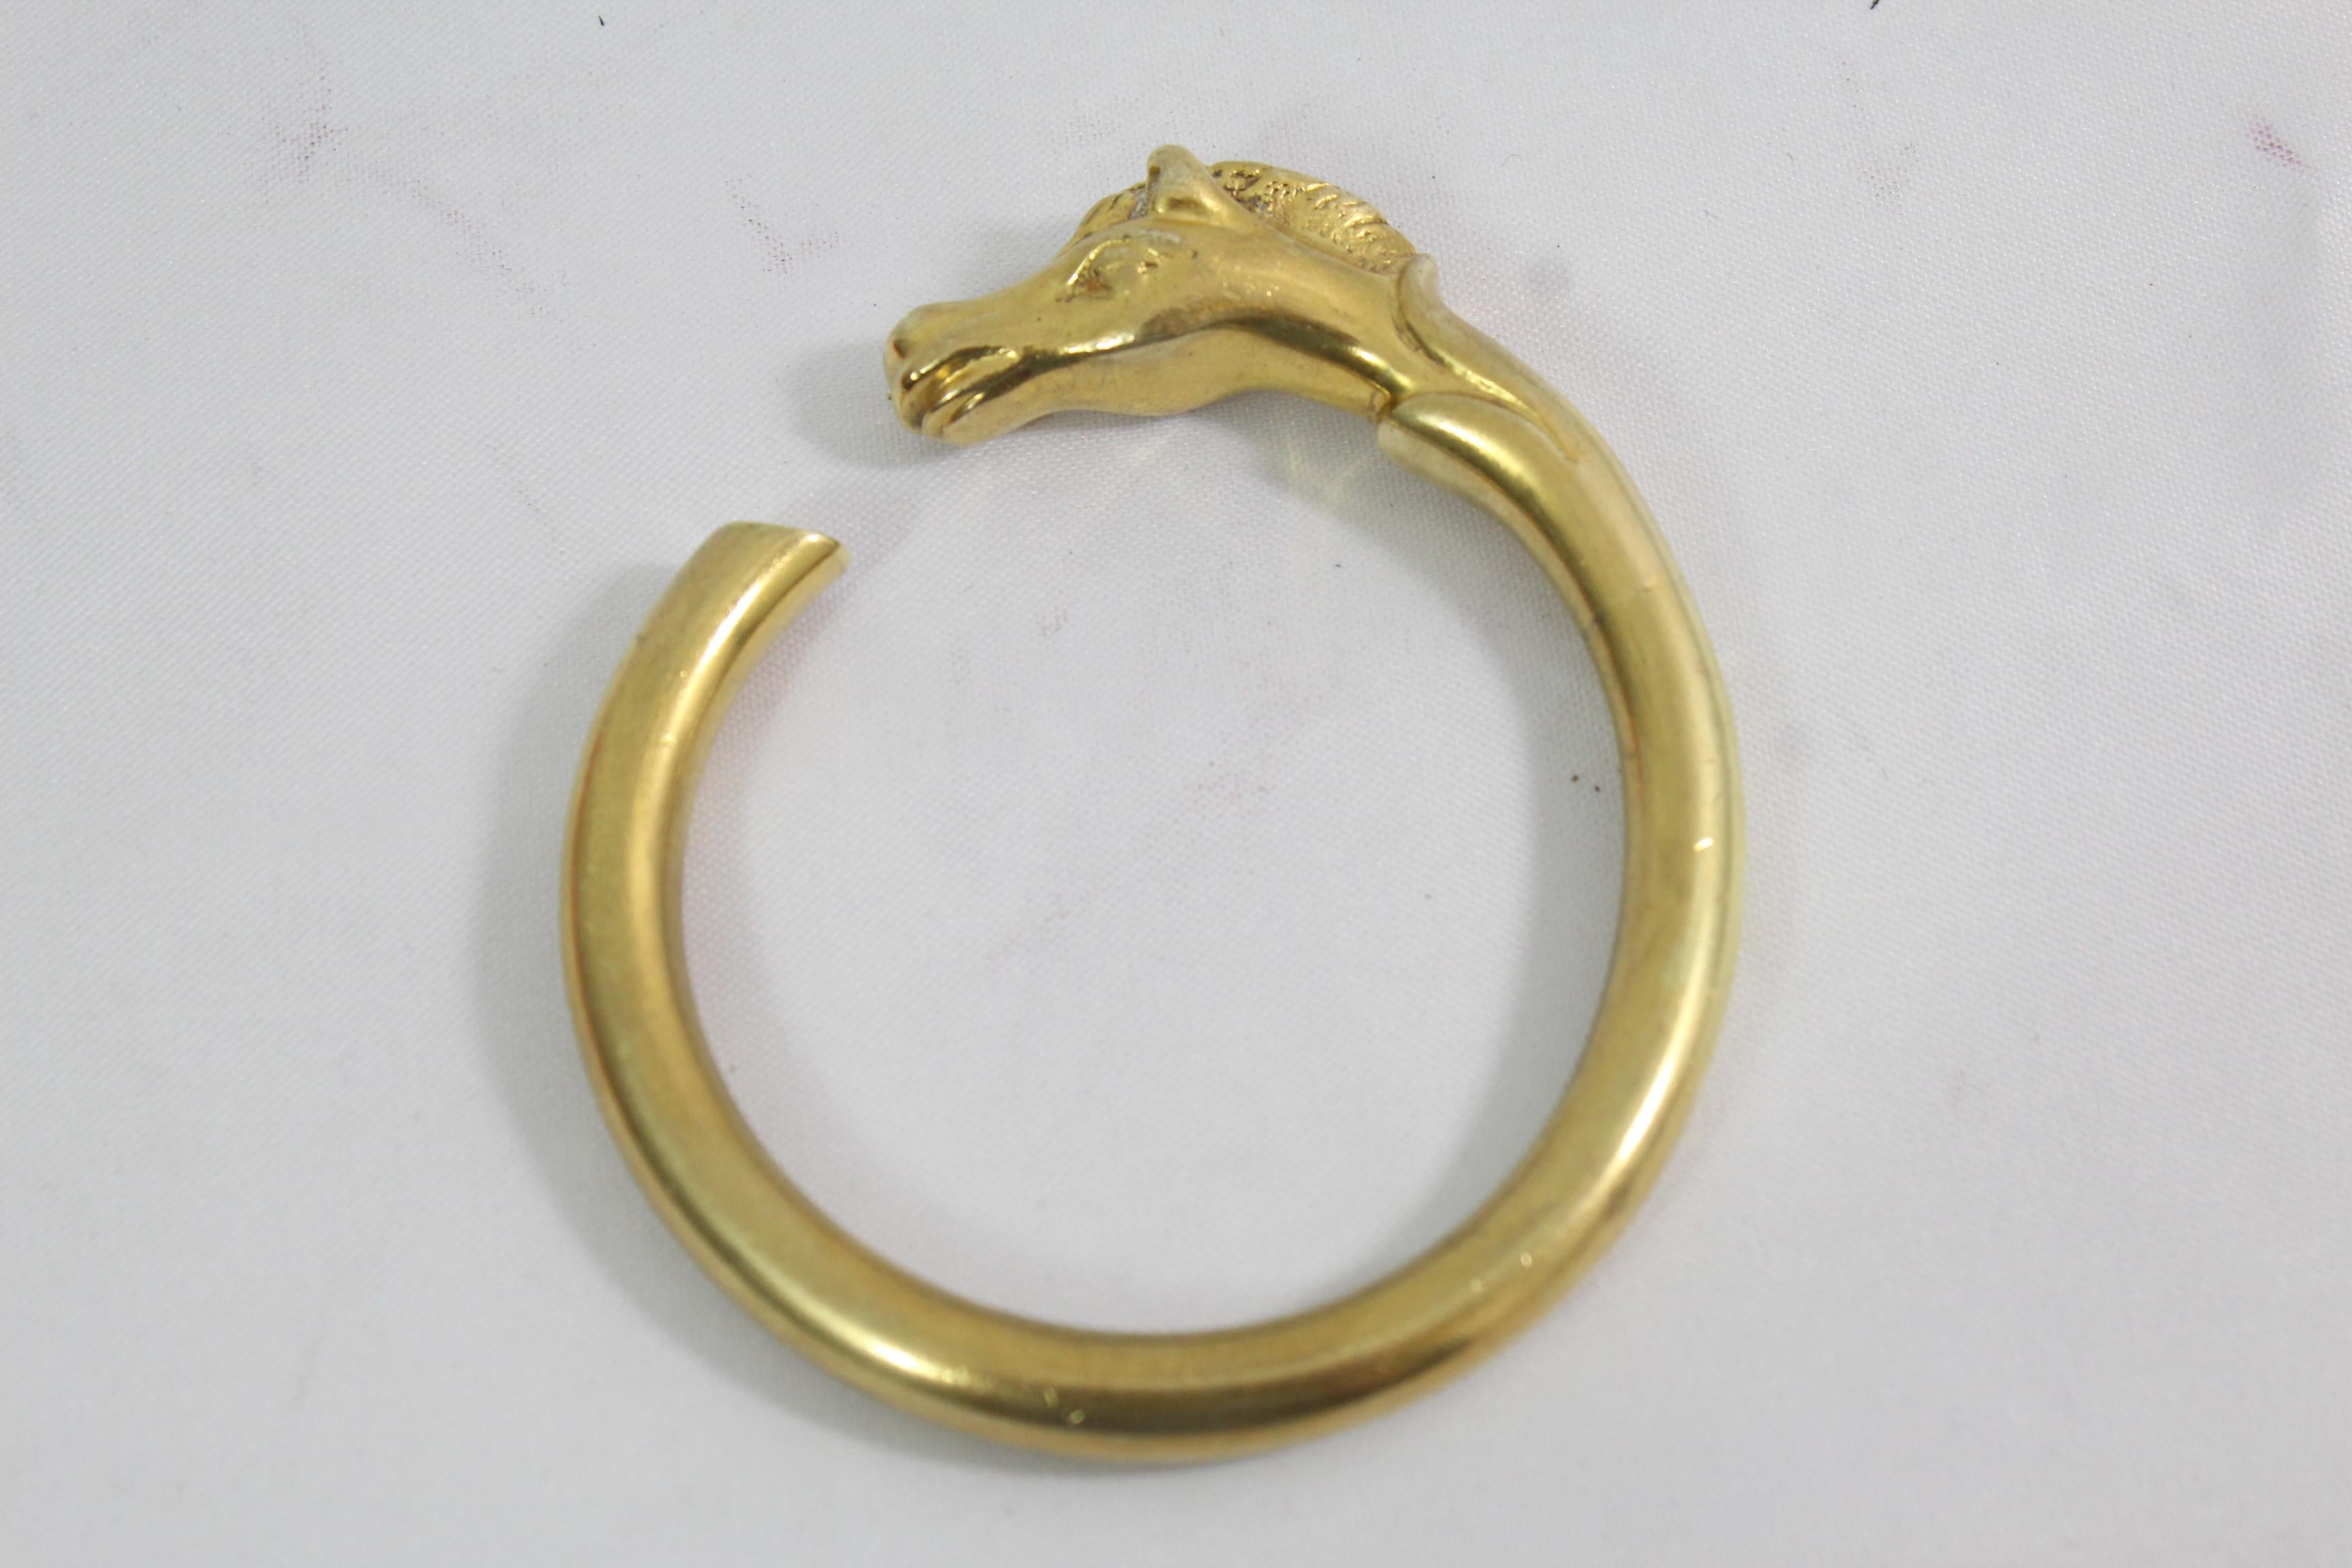 For sale  vintage Hermes Bangle in Vermeil ( golden Silver)representing a horse.

Good condition but some signs of use due to its age.

This is one of the most mythical bangles from Hermes

Sold with box